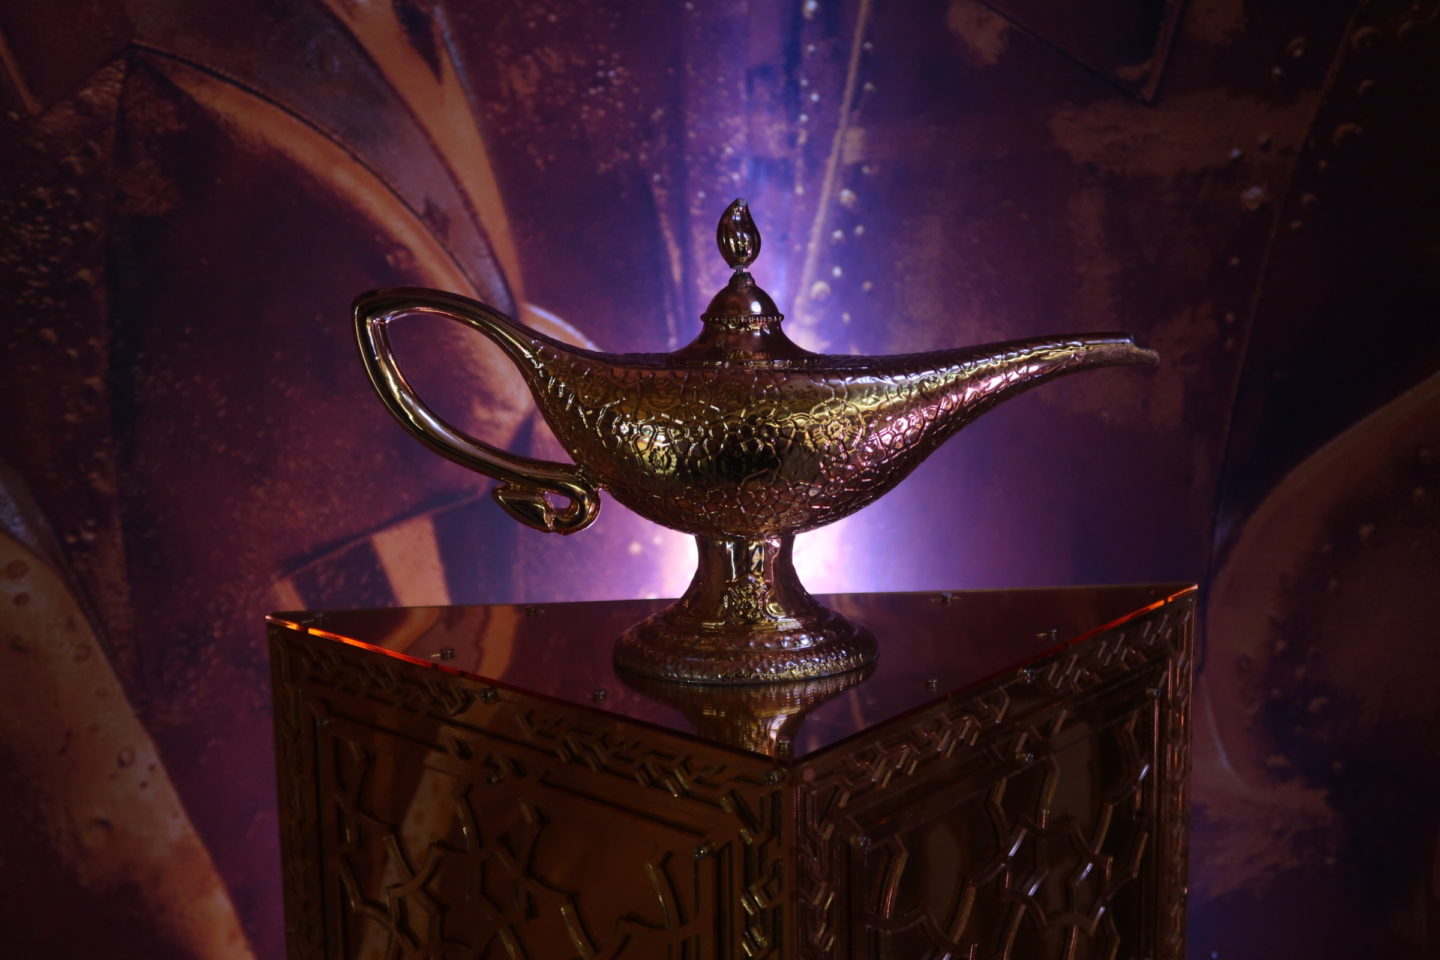 The lamp from Aladdin